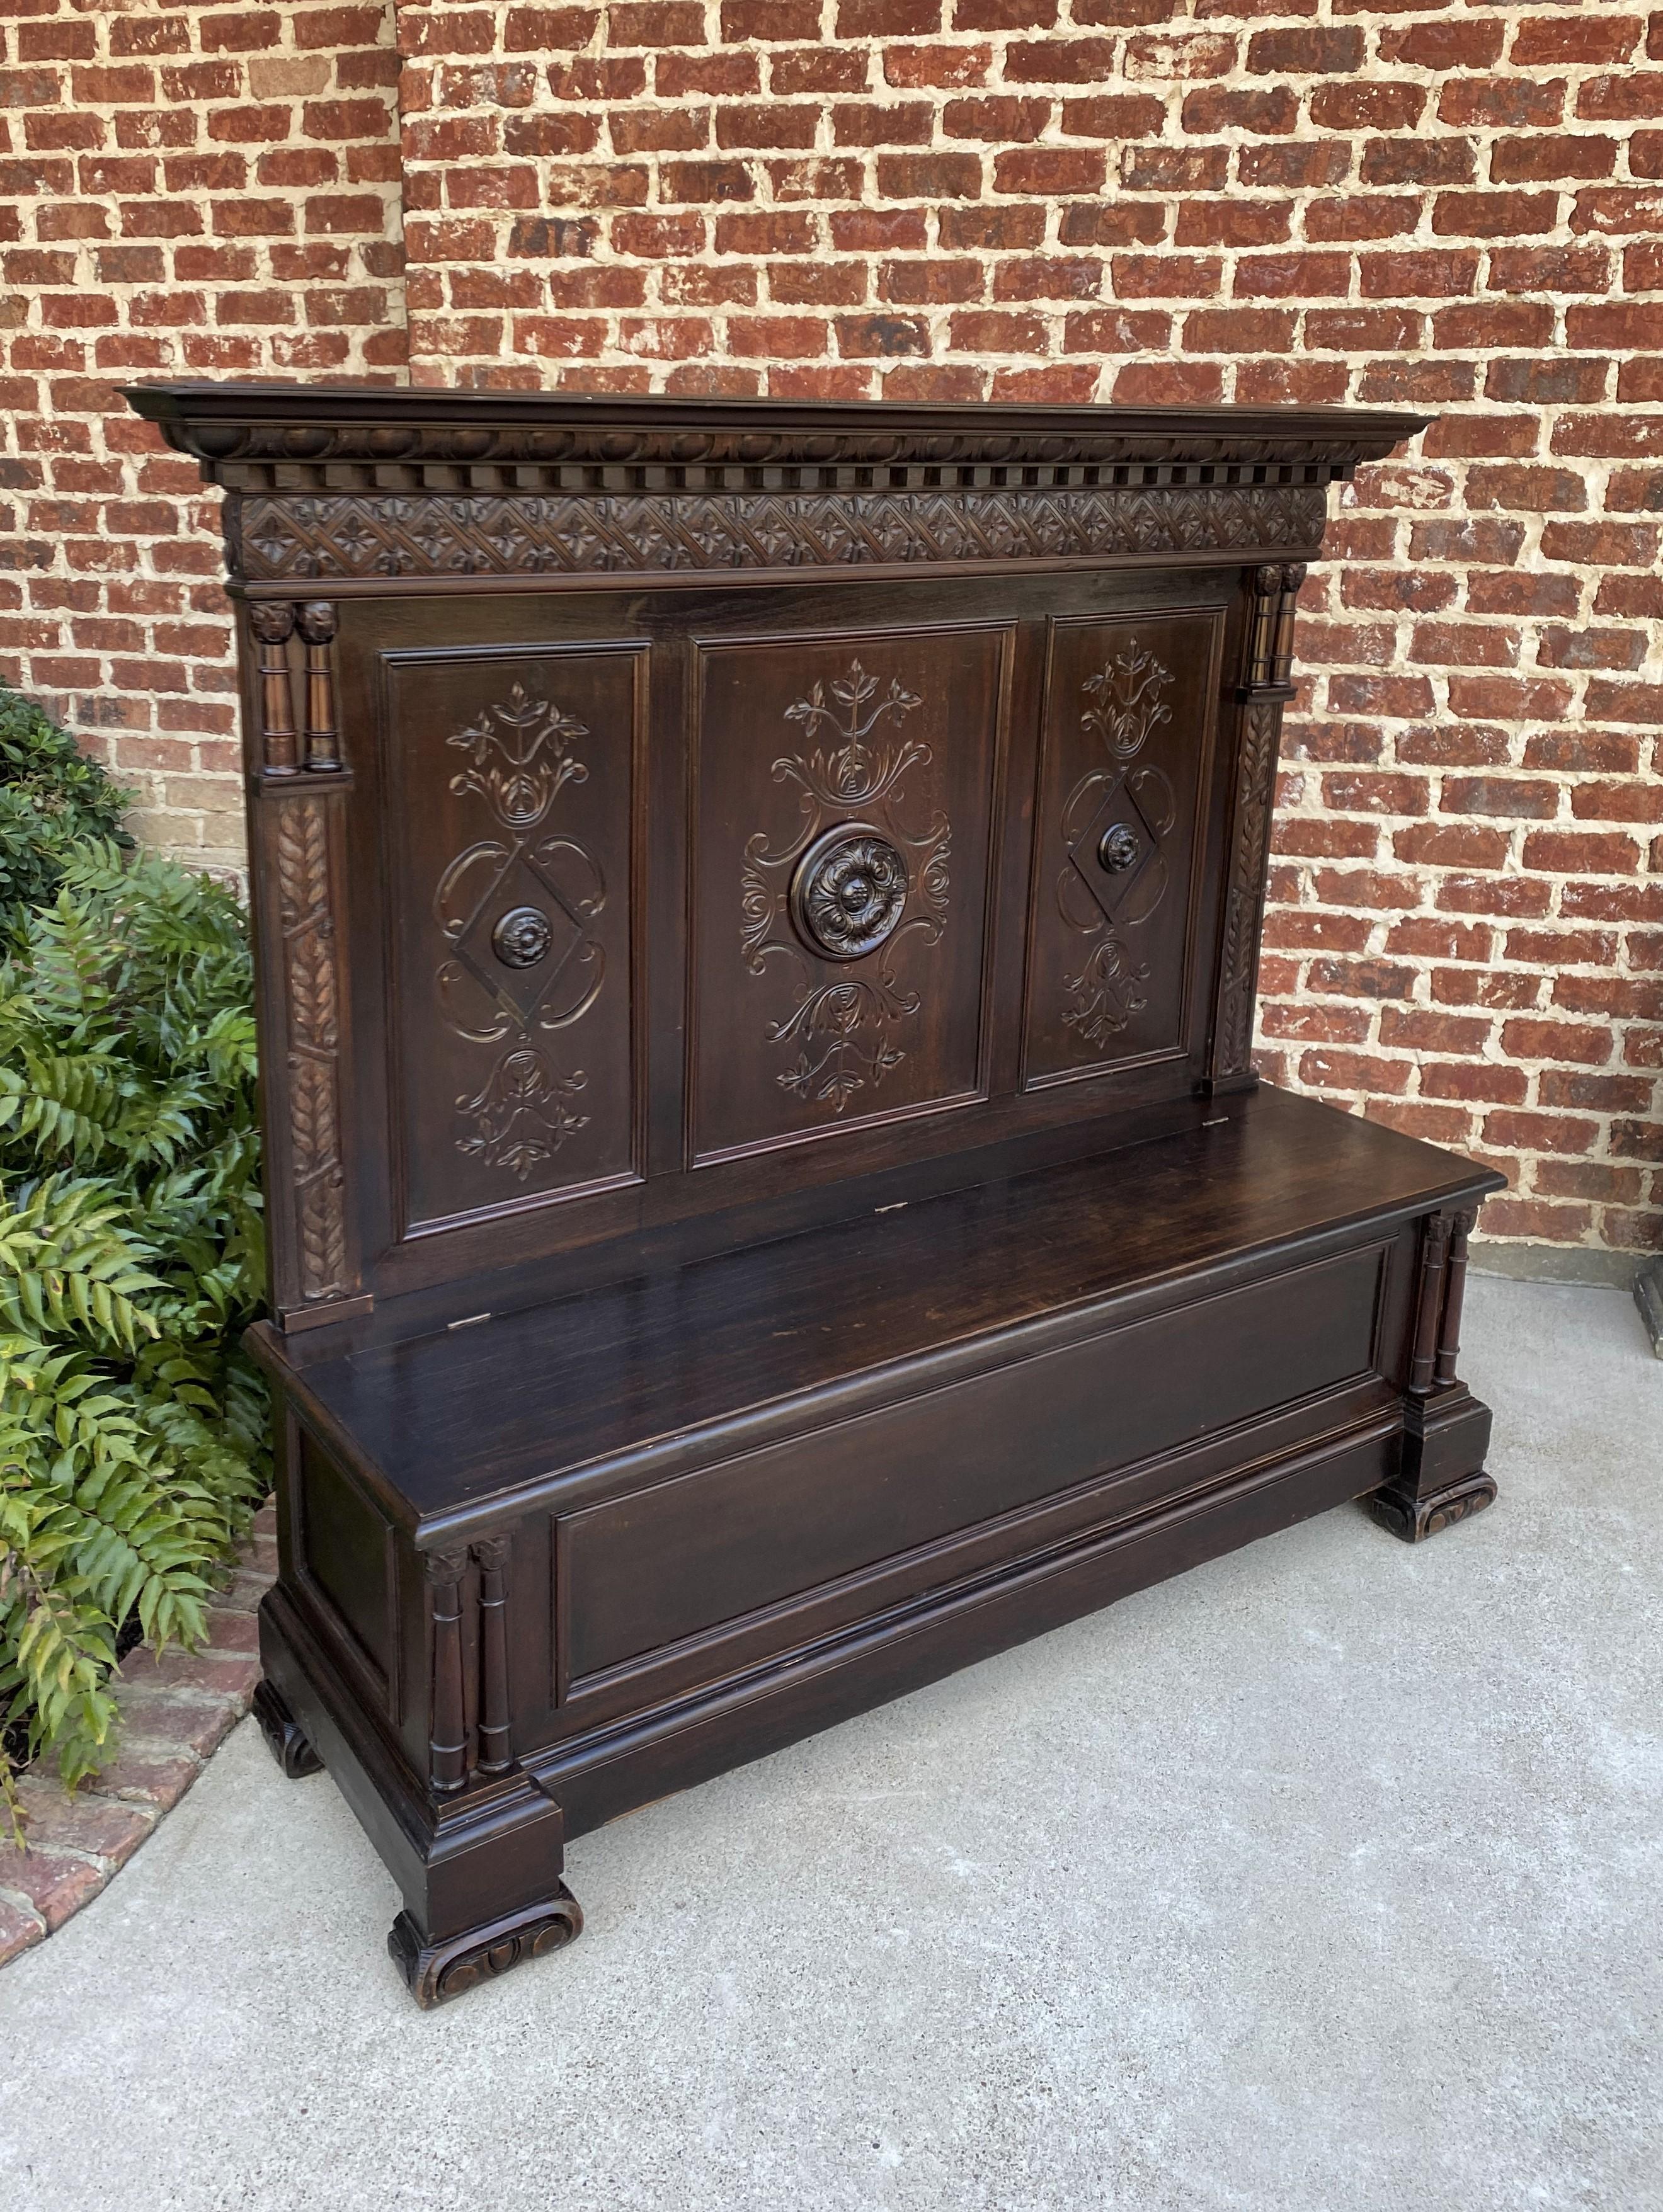 Antique Italian Bench Settee Entry Hall Foyer Renaissance Revival Oak 19th C In Good Condition For Sale In Tyler, TX